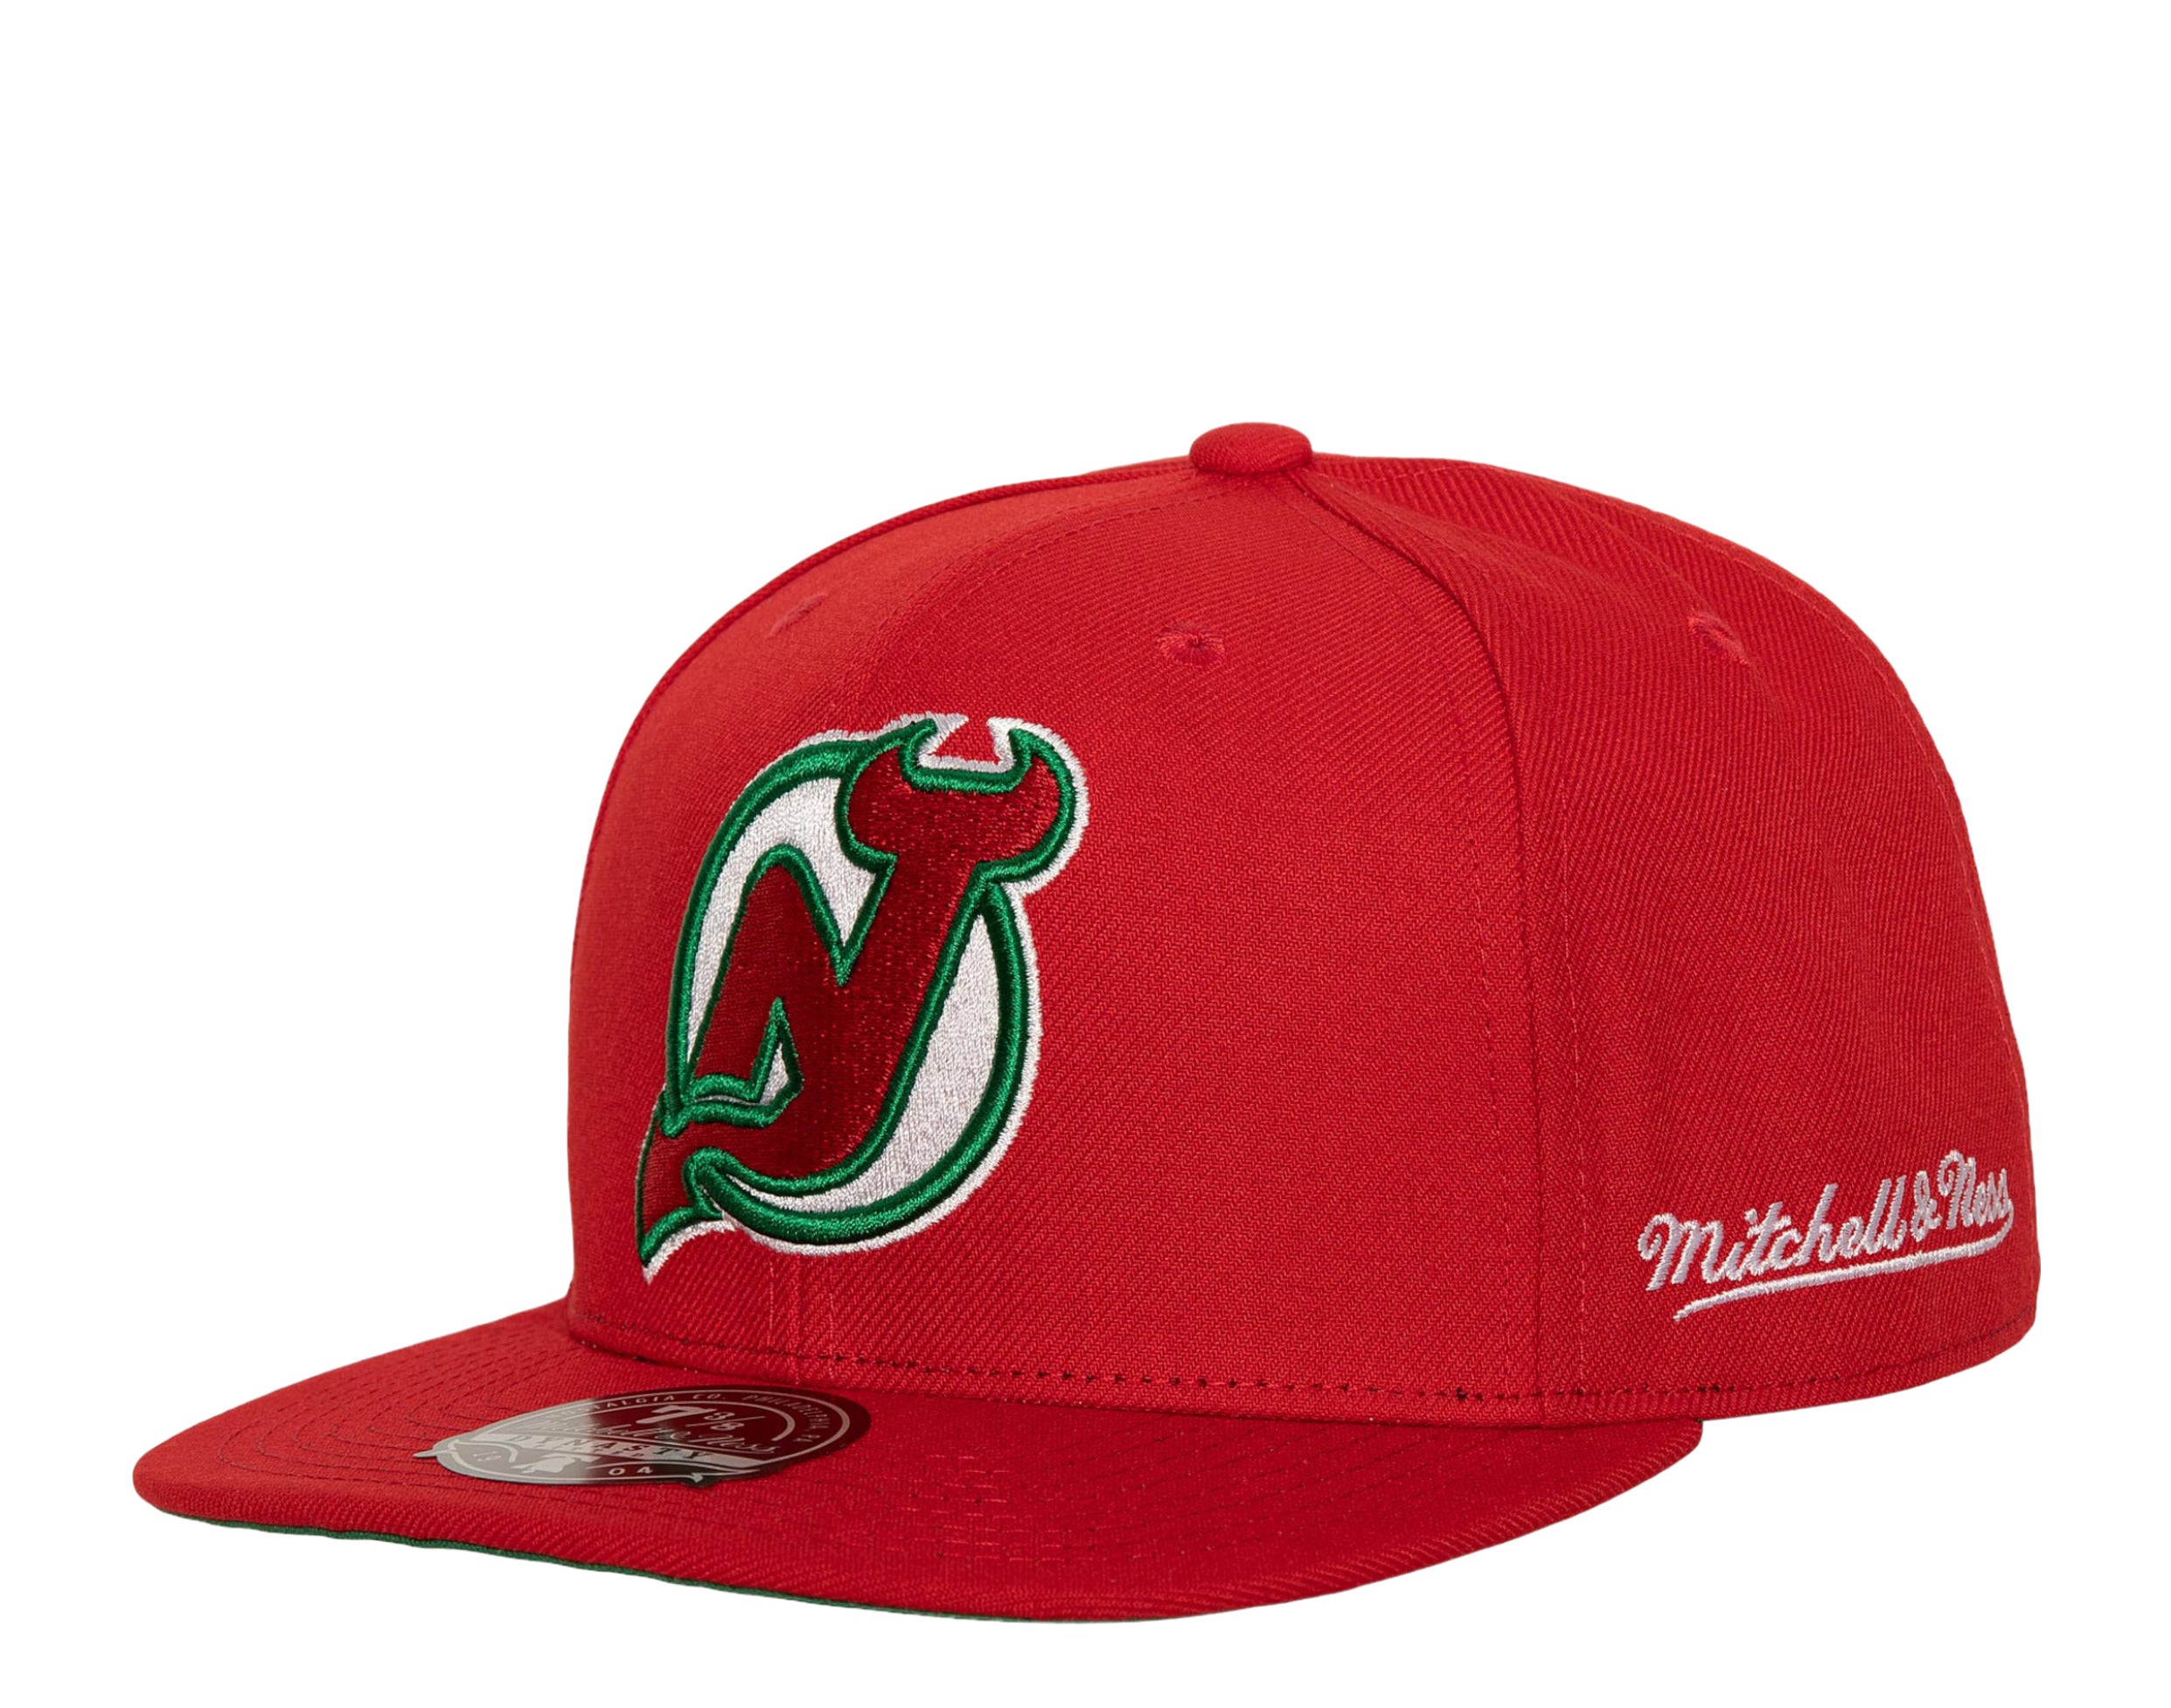 mitchell and ness snapback hat new jersey devils nhl